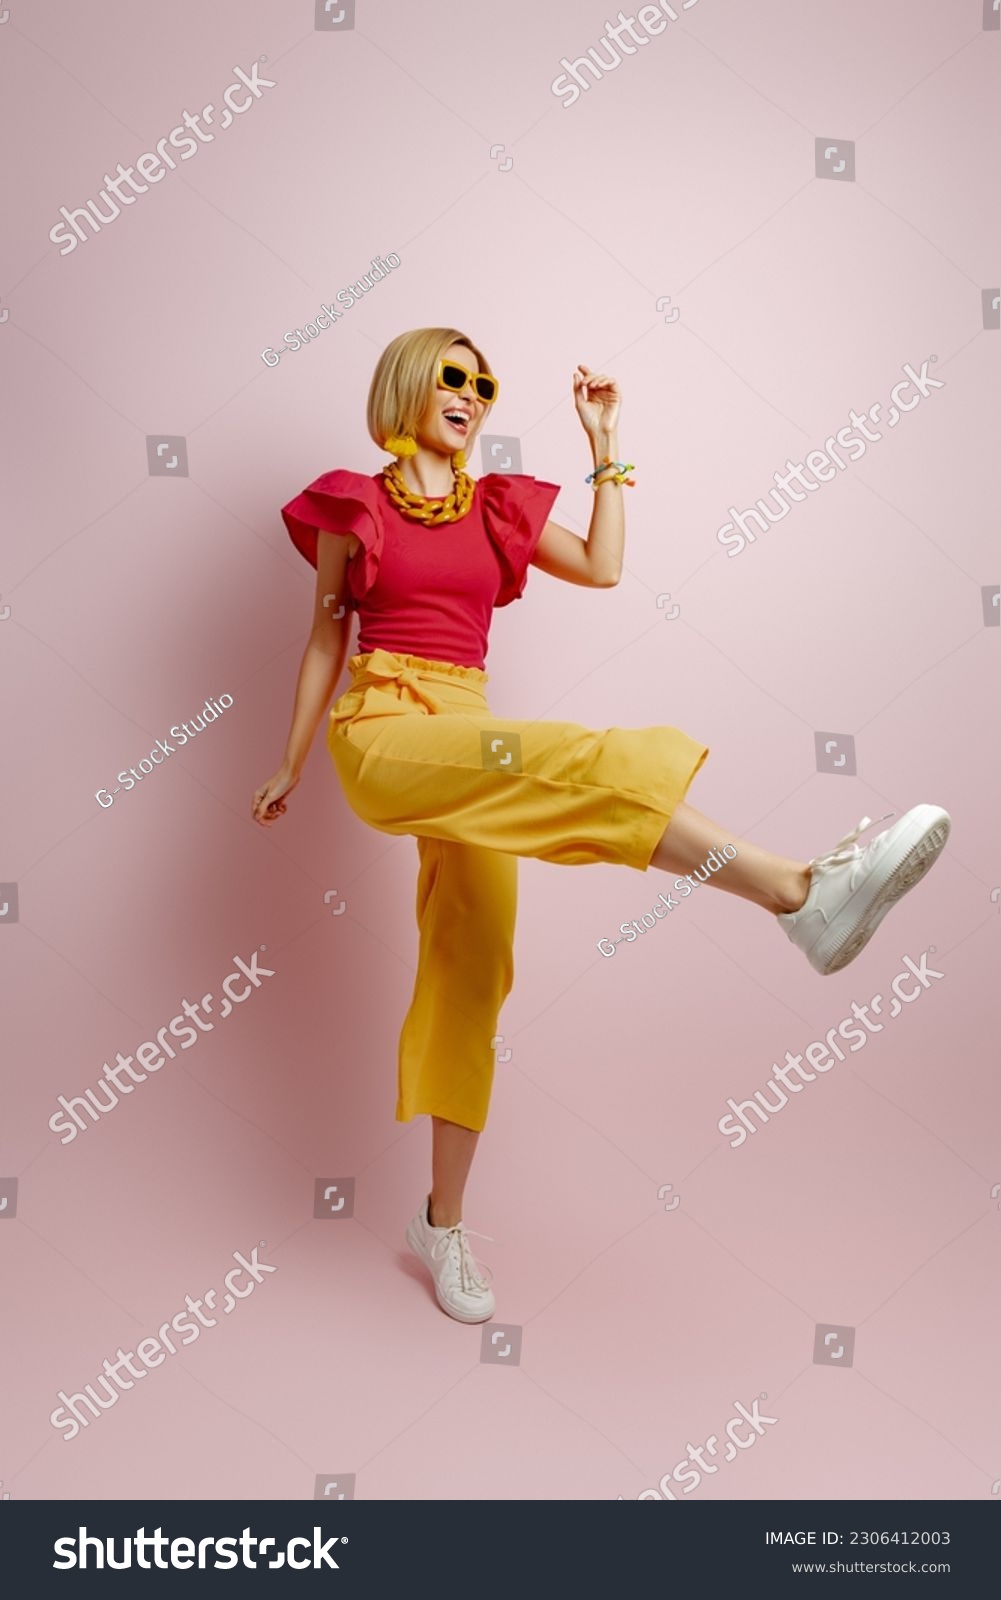 Full length of excited young woman in vibrant clothes dancing against colored background #2306412003